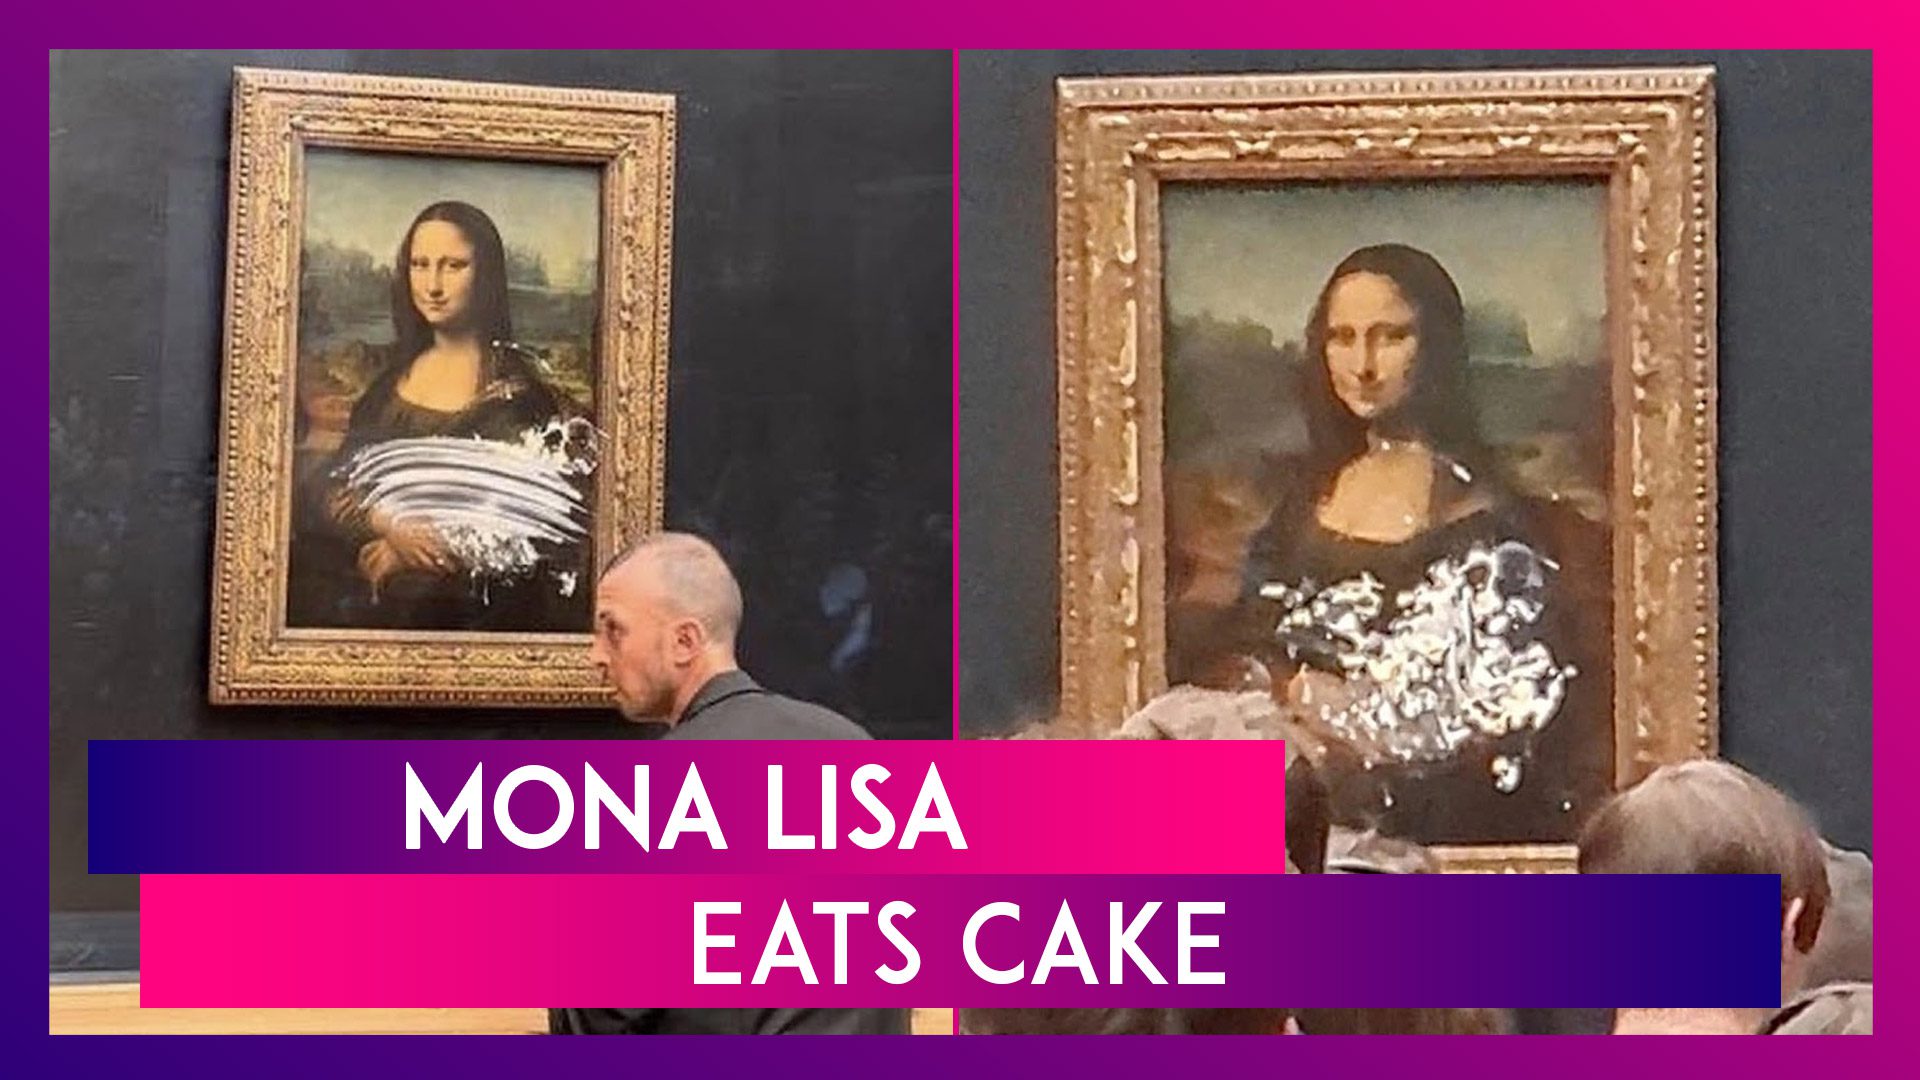 Mona Lisa Gets Smeared With Cake By A Man Disguised As An Old Woman: Pics